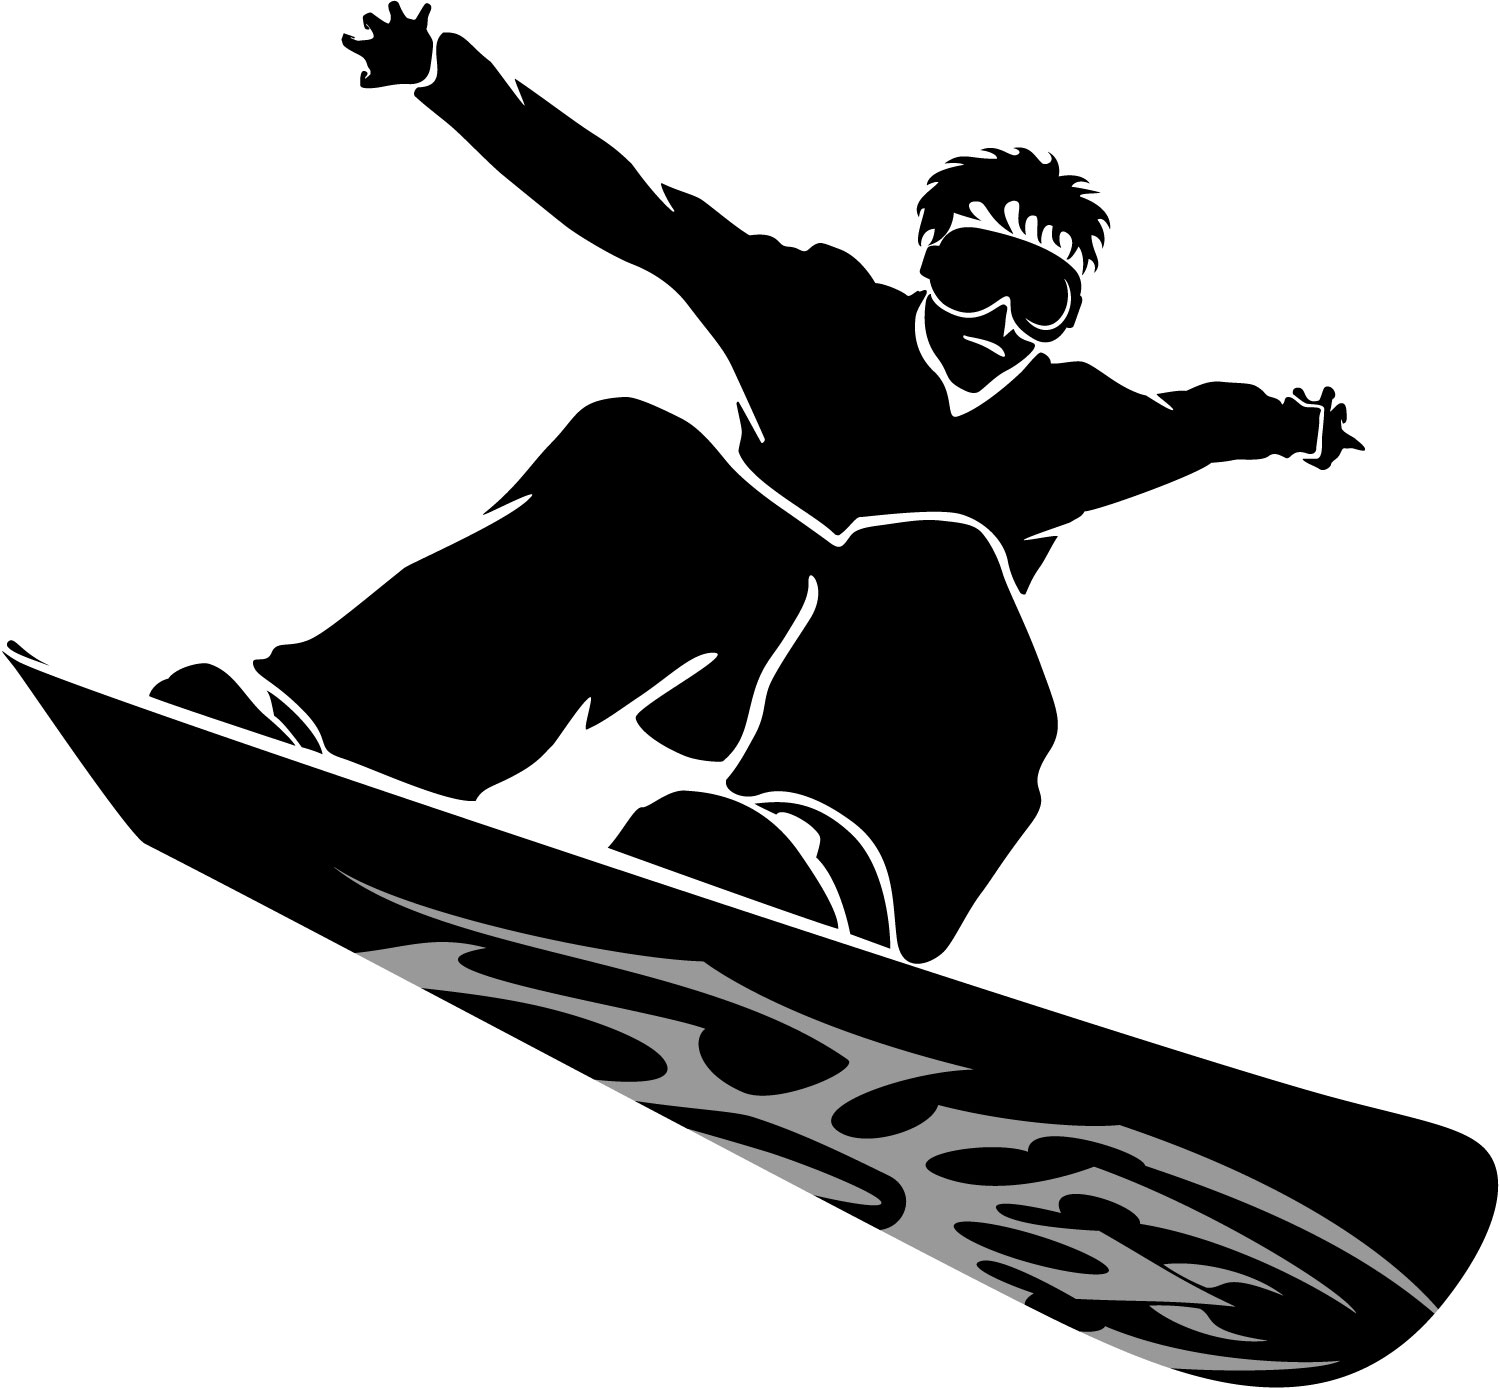 Snowboarder Picture - Snowboarding Clipart